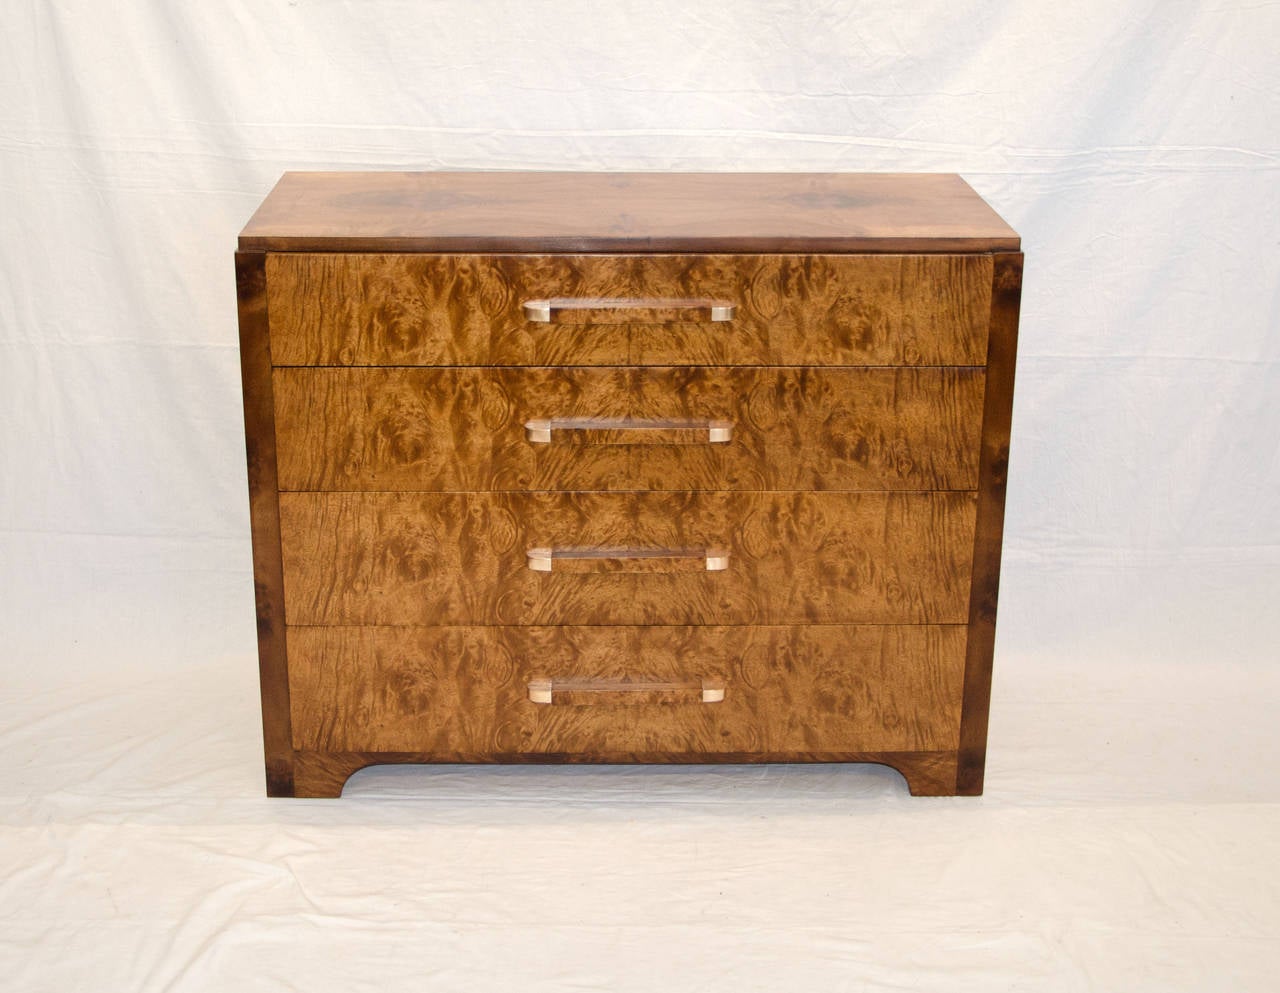 Beautiful burled walnut Art Deco chest of drawers attributed to Donald Deskey and manufactured by Widdicomb. Drawer bottoms are made of mahogany and have ample storage space with a graduated depth of 4